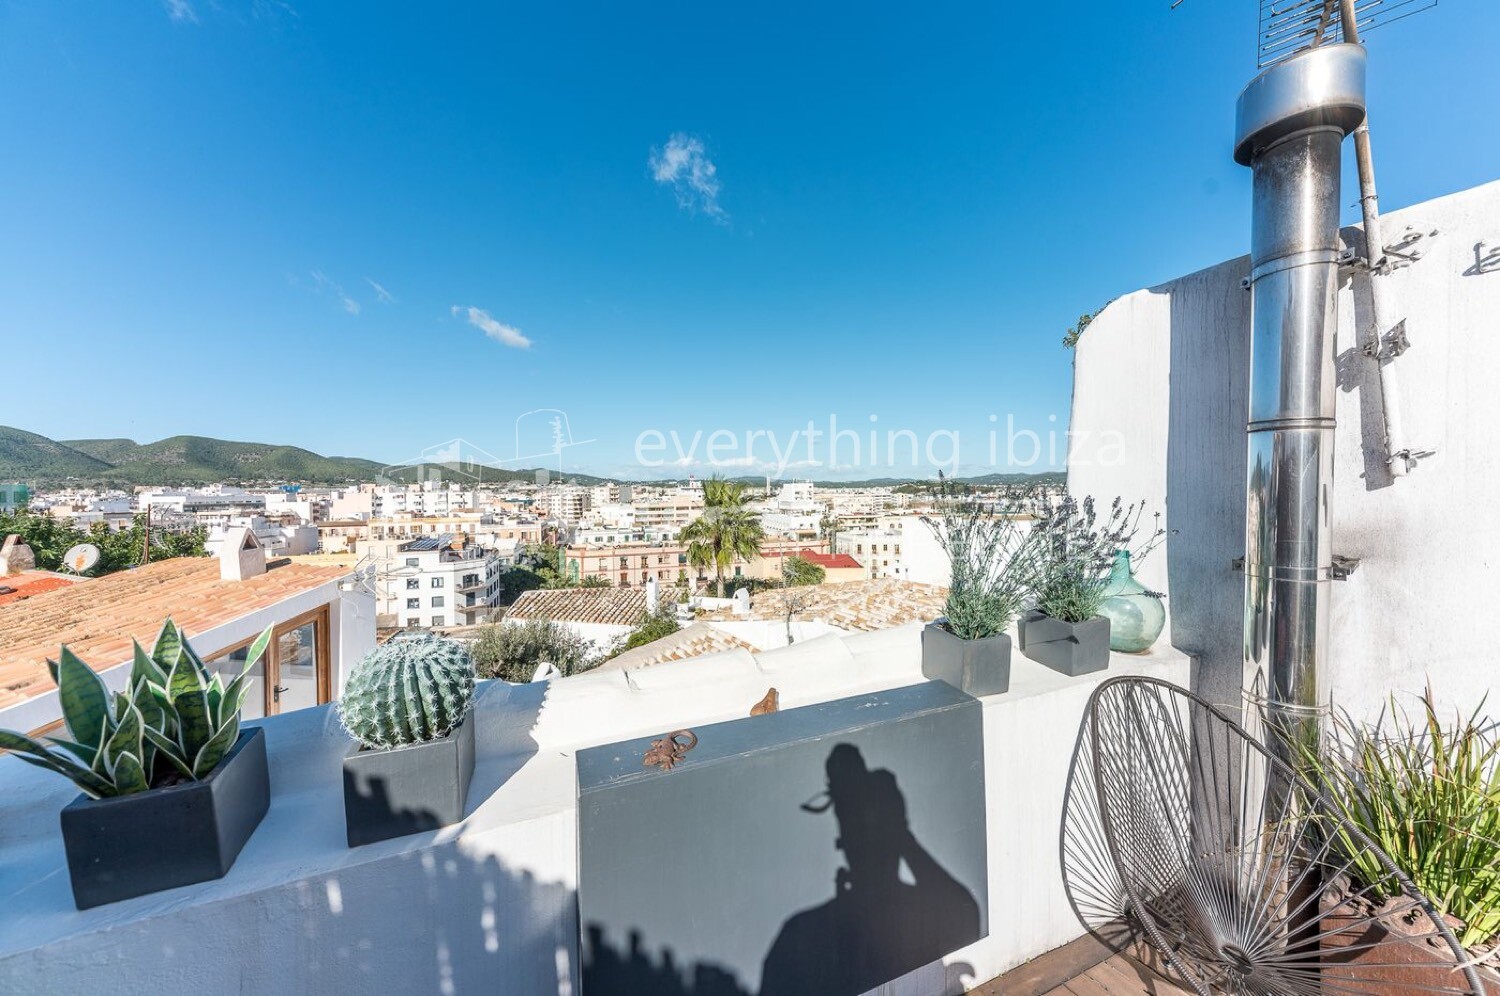 Lovely Townhouse in Dalt Vila Area of Ibiza Town, ref. 1407, for sale in Ibiza by everything ibiza Properties